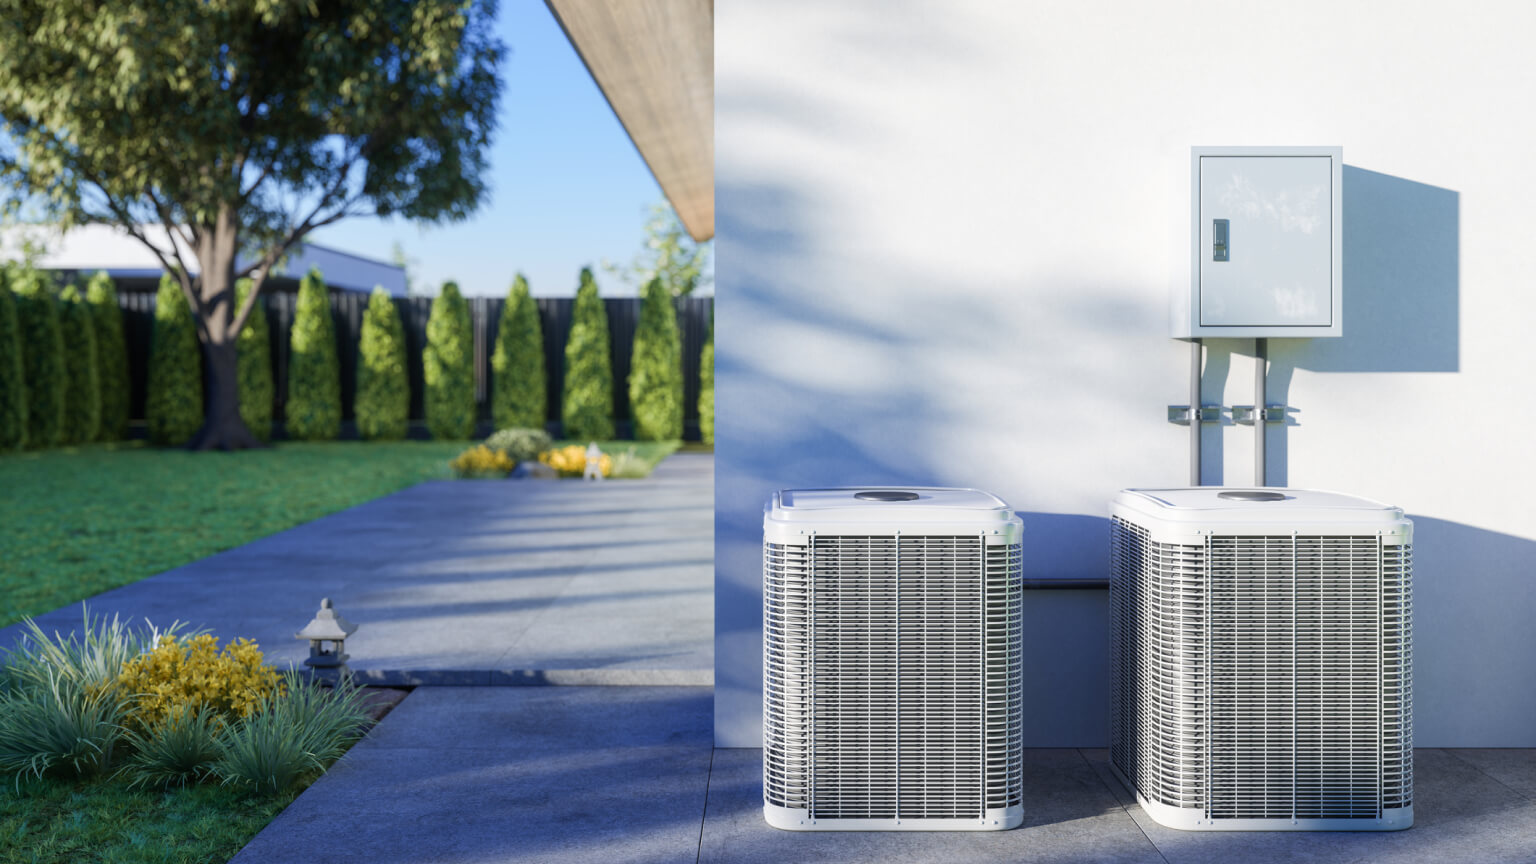 Close-up View Of Air Conditioning Outdoor Units In The Backyard